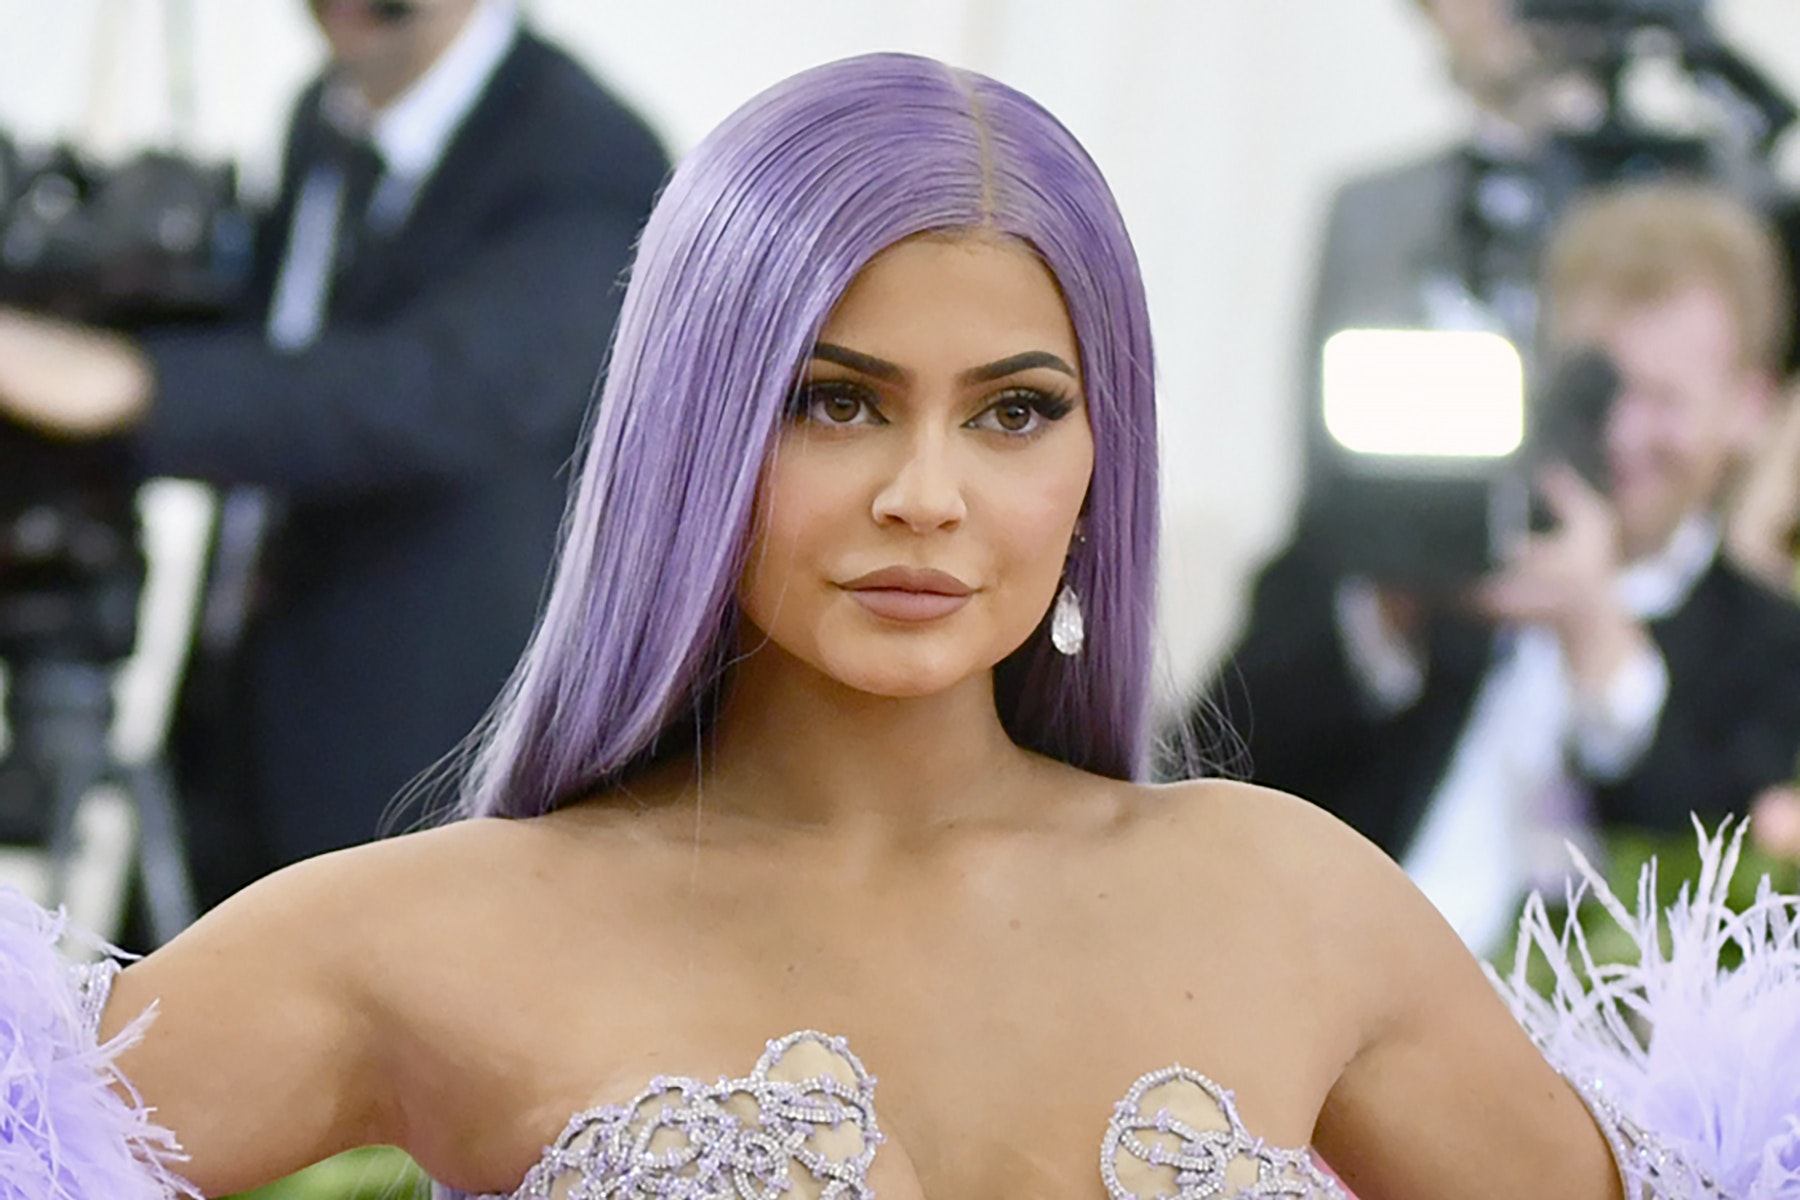 Kylie Jenner sells majority stake in her cosmetics business